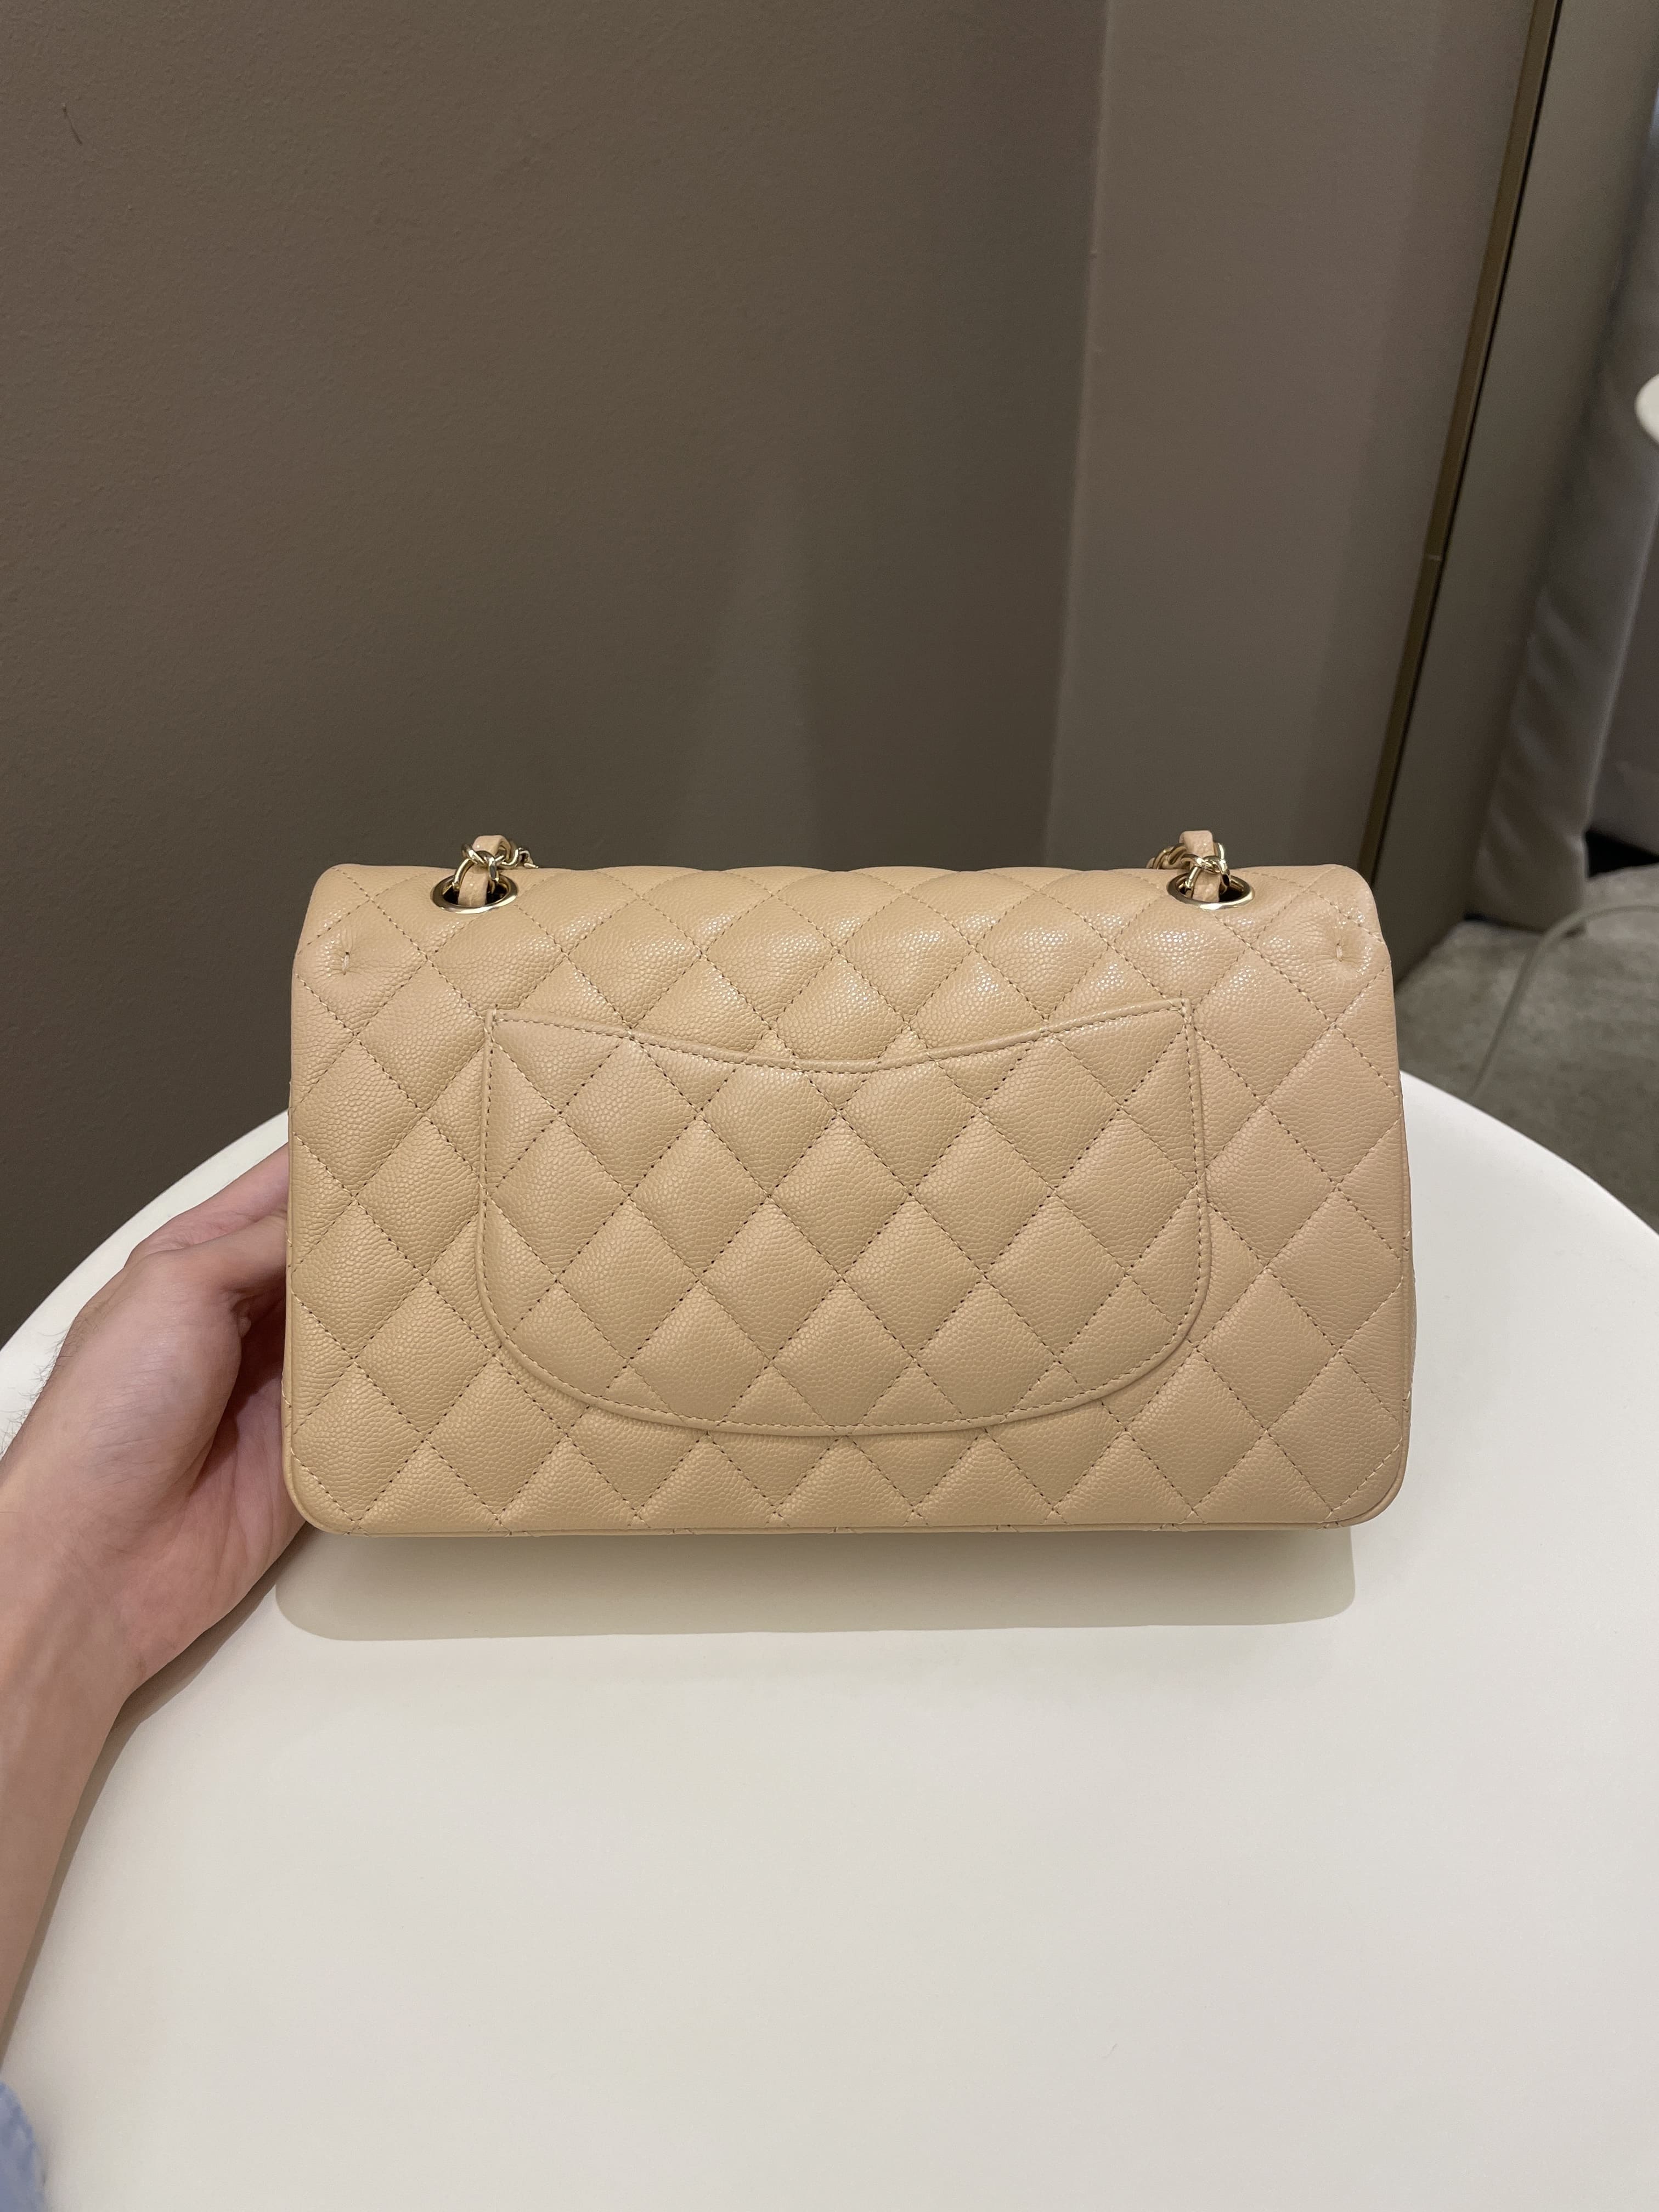 Chanel Beige Clair Quilted Caviar Leather Classic Medium Double